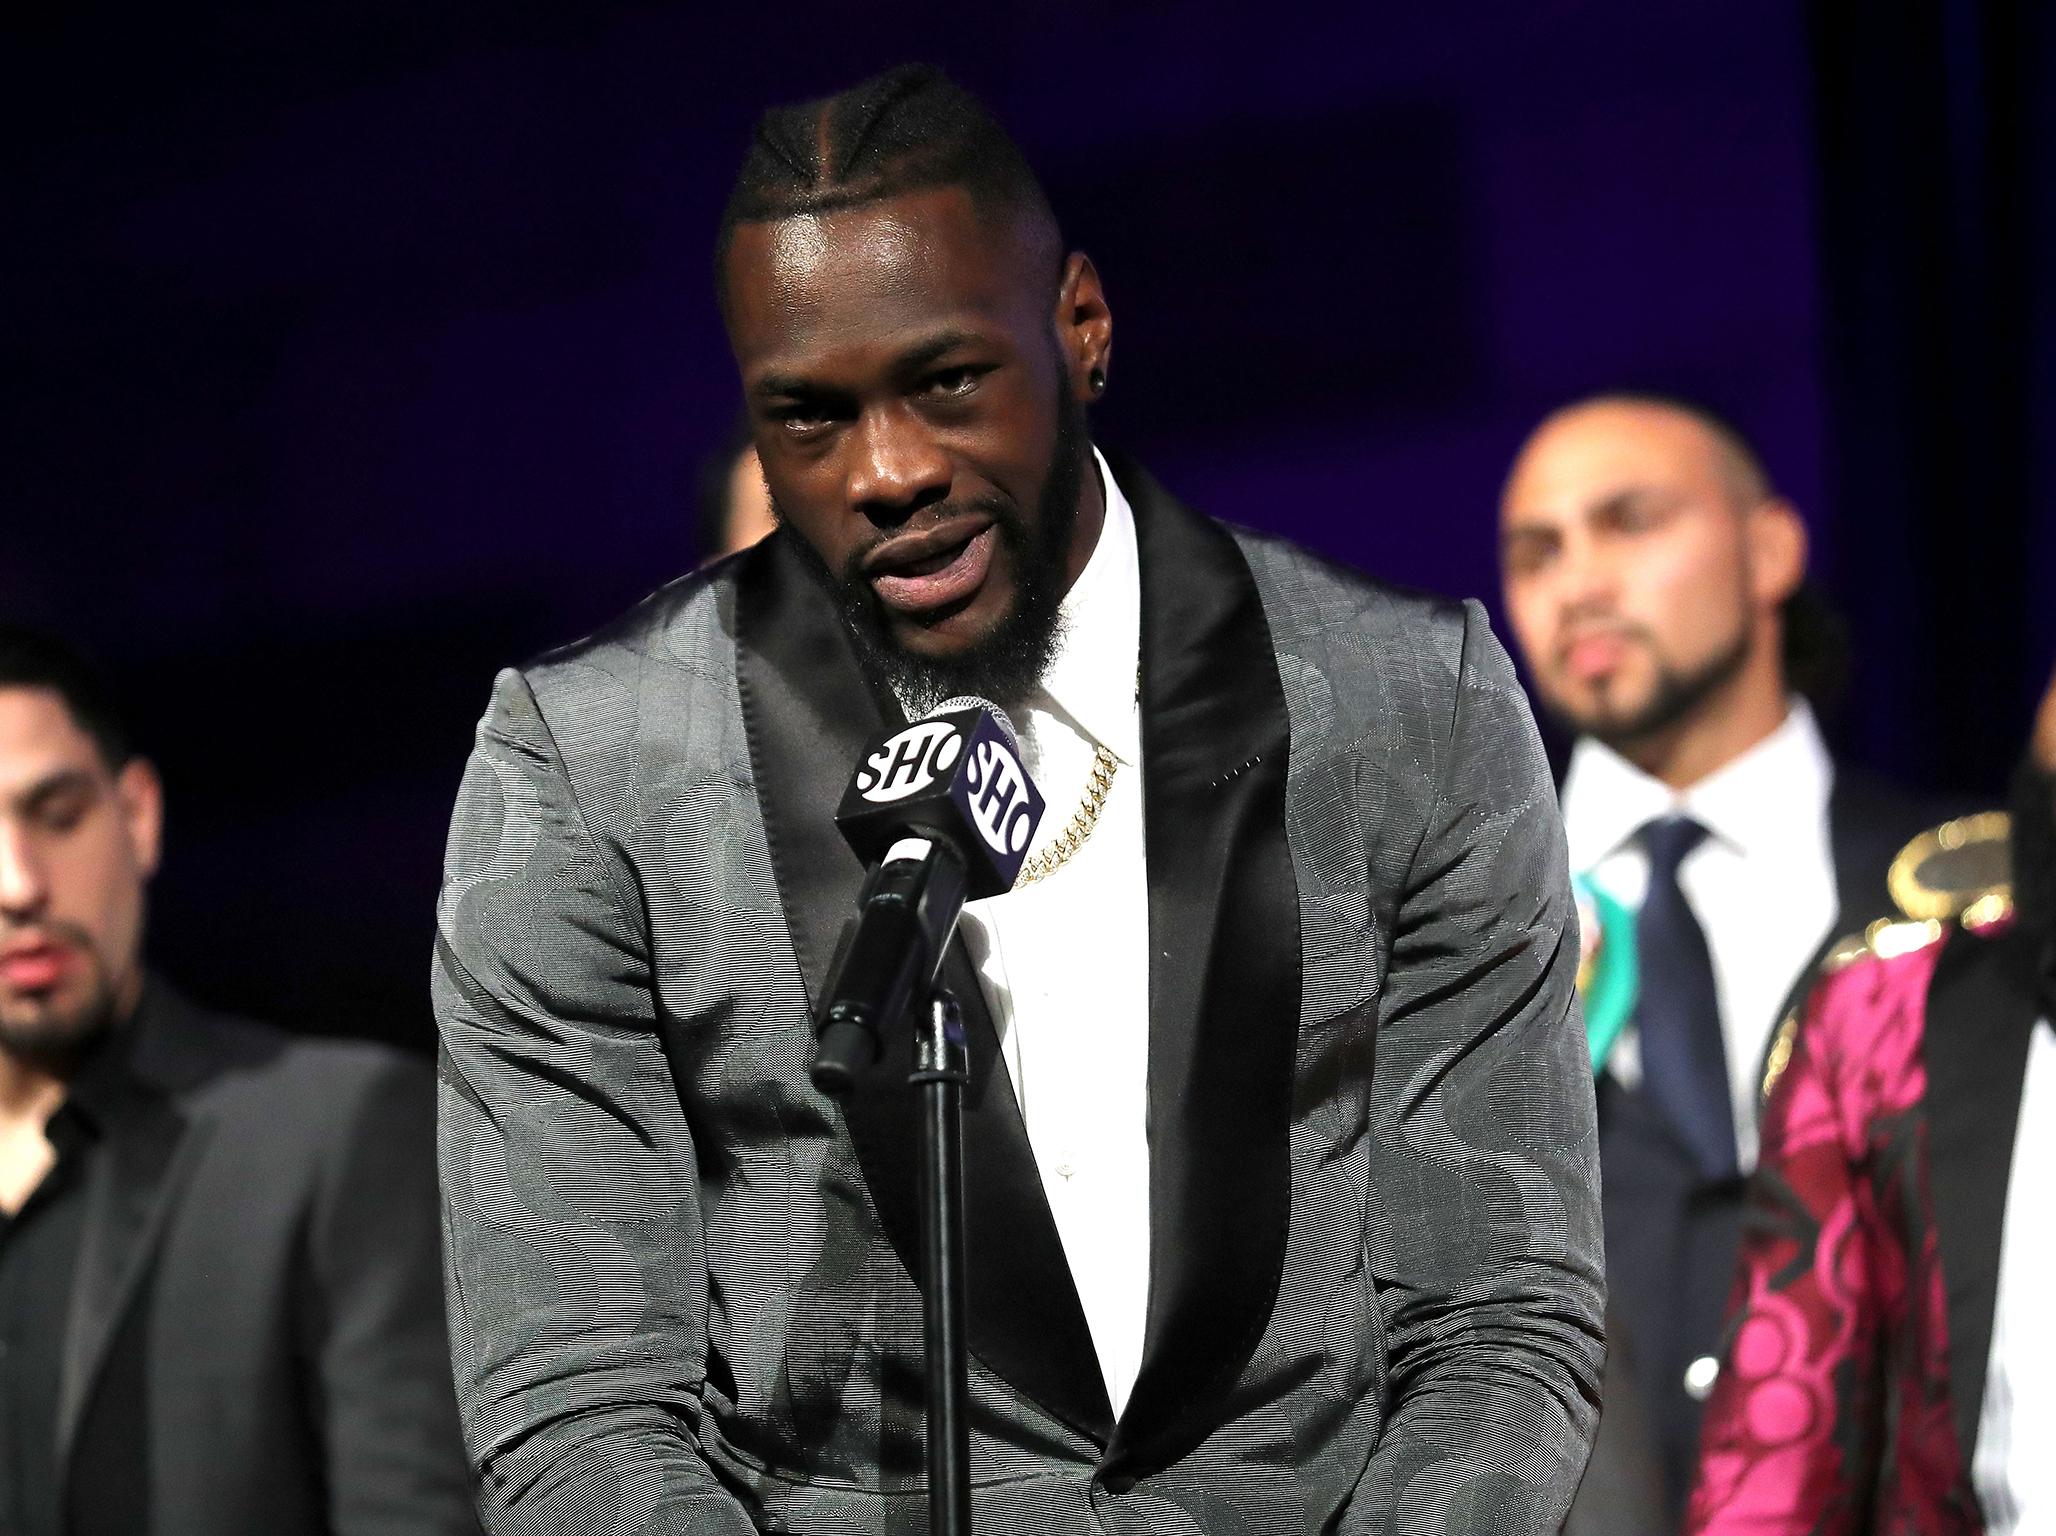 Wilder will line up against Whyte if he accepts Hearn’s offer